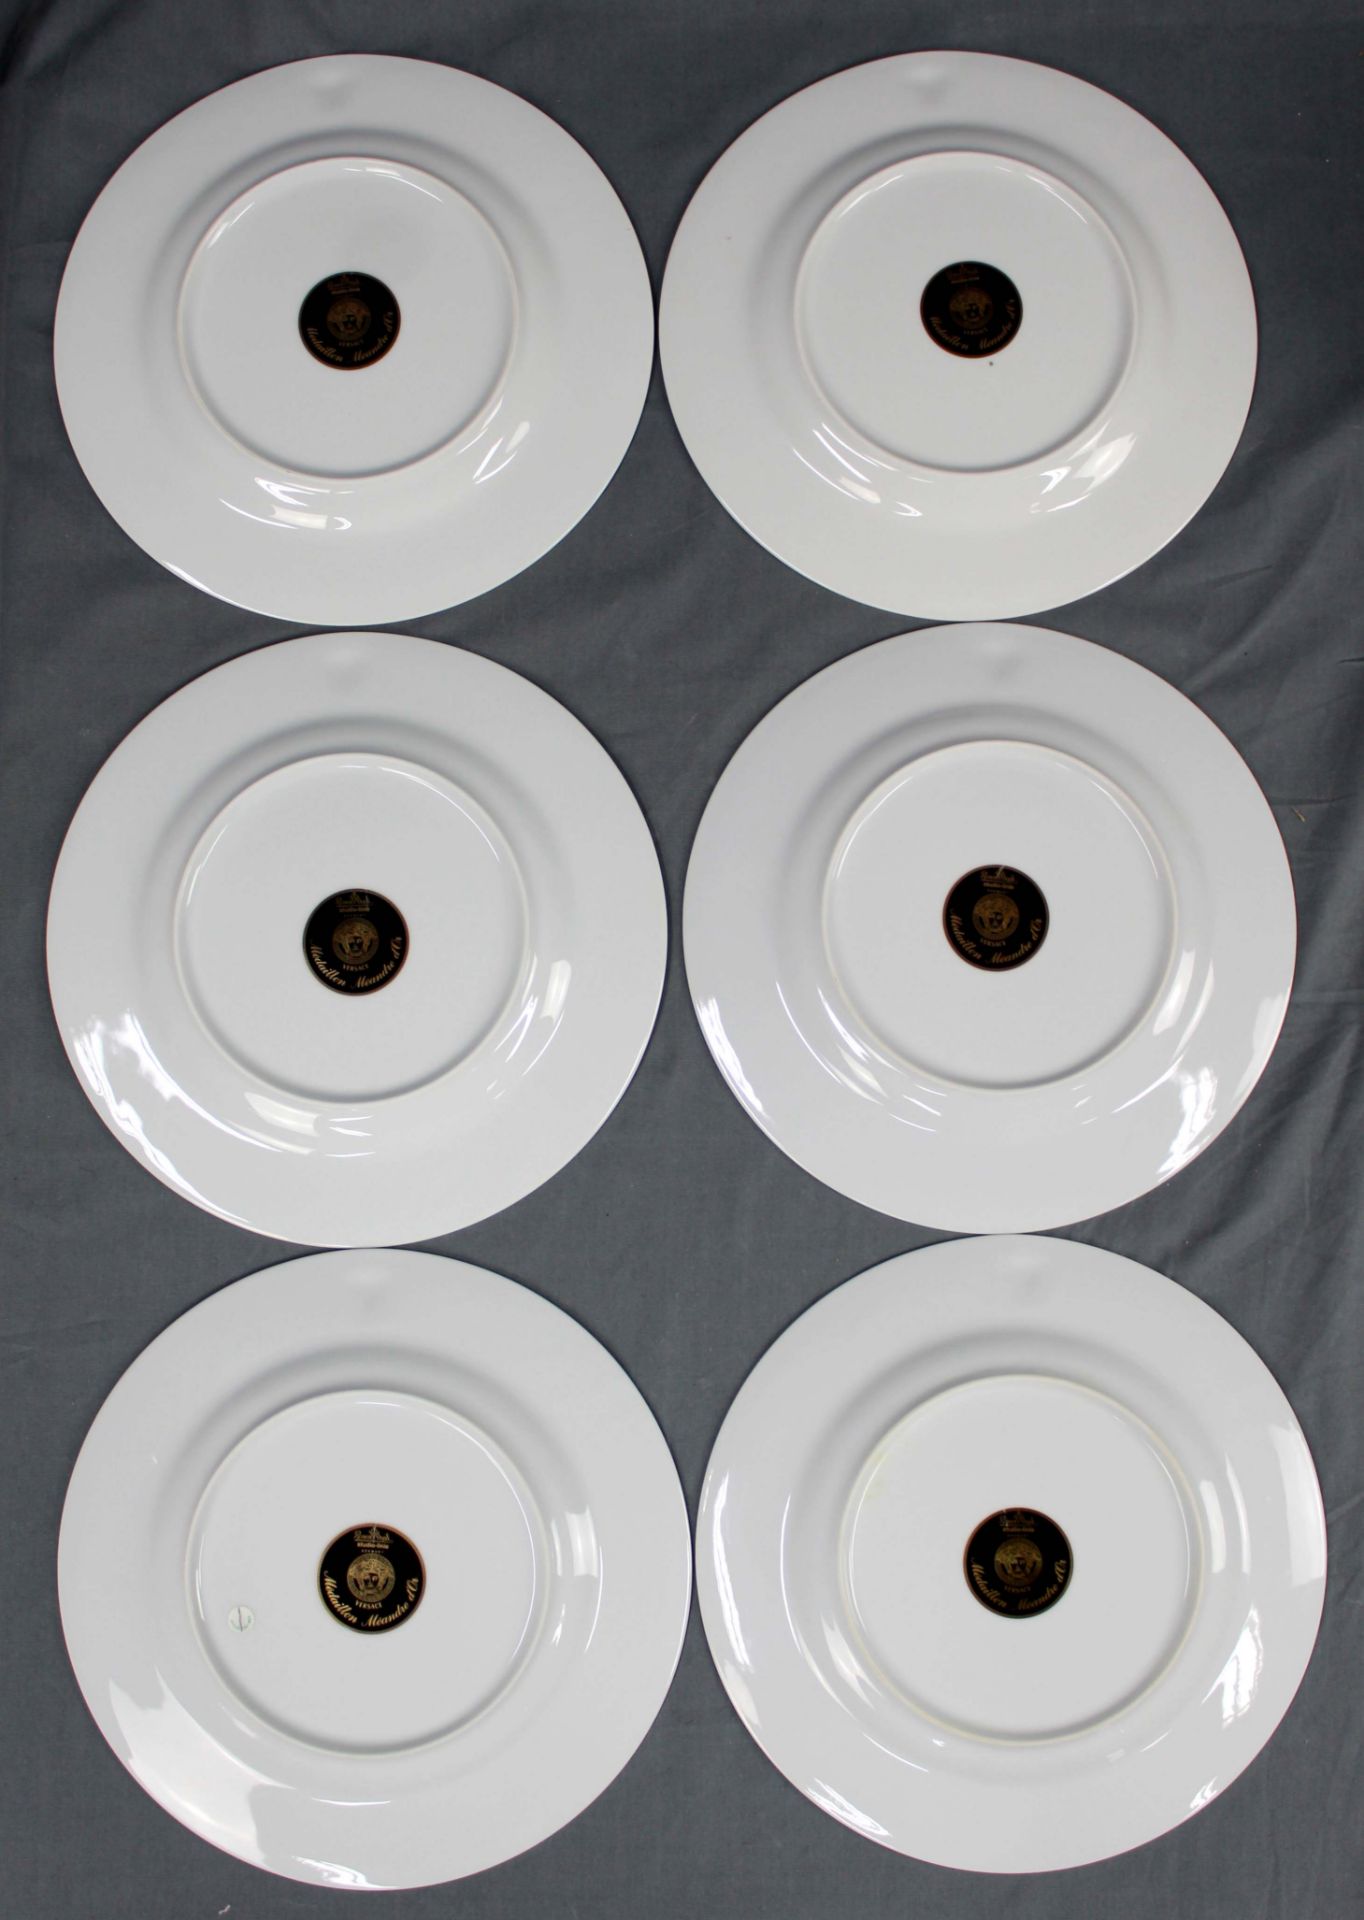 Rosenthal Versace porcelain. Dining service and coffee service for 6 people. - Image 8 of 27